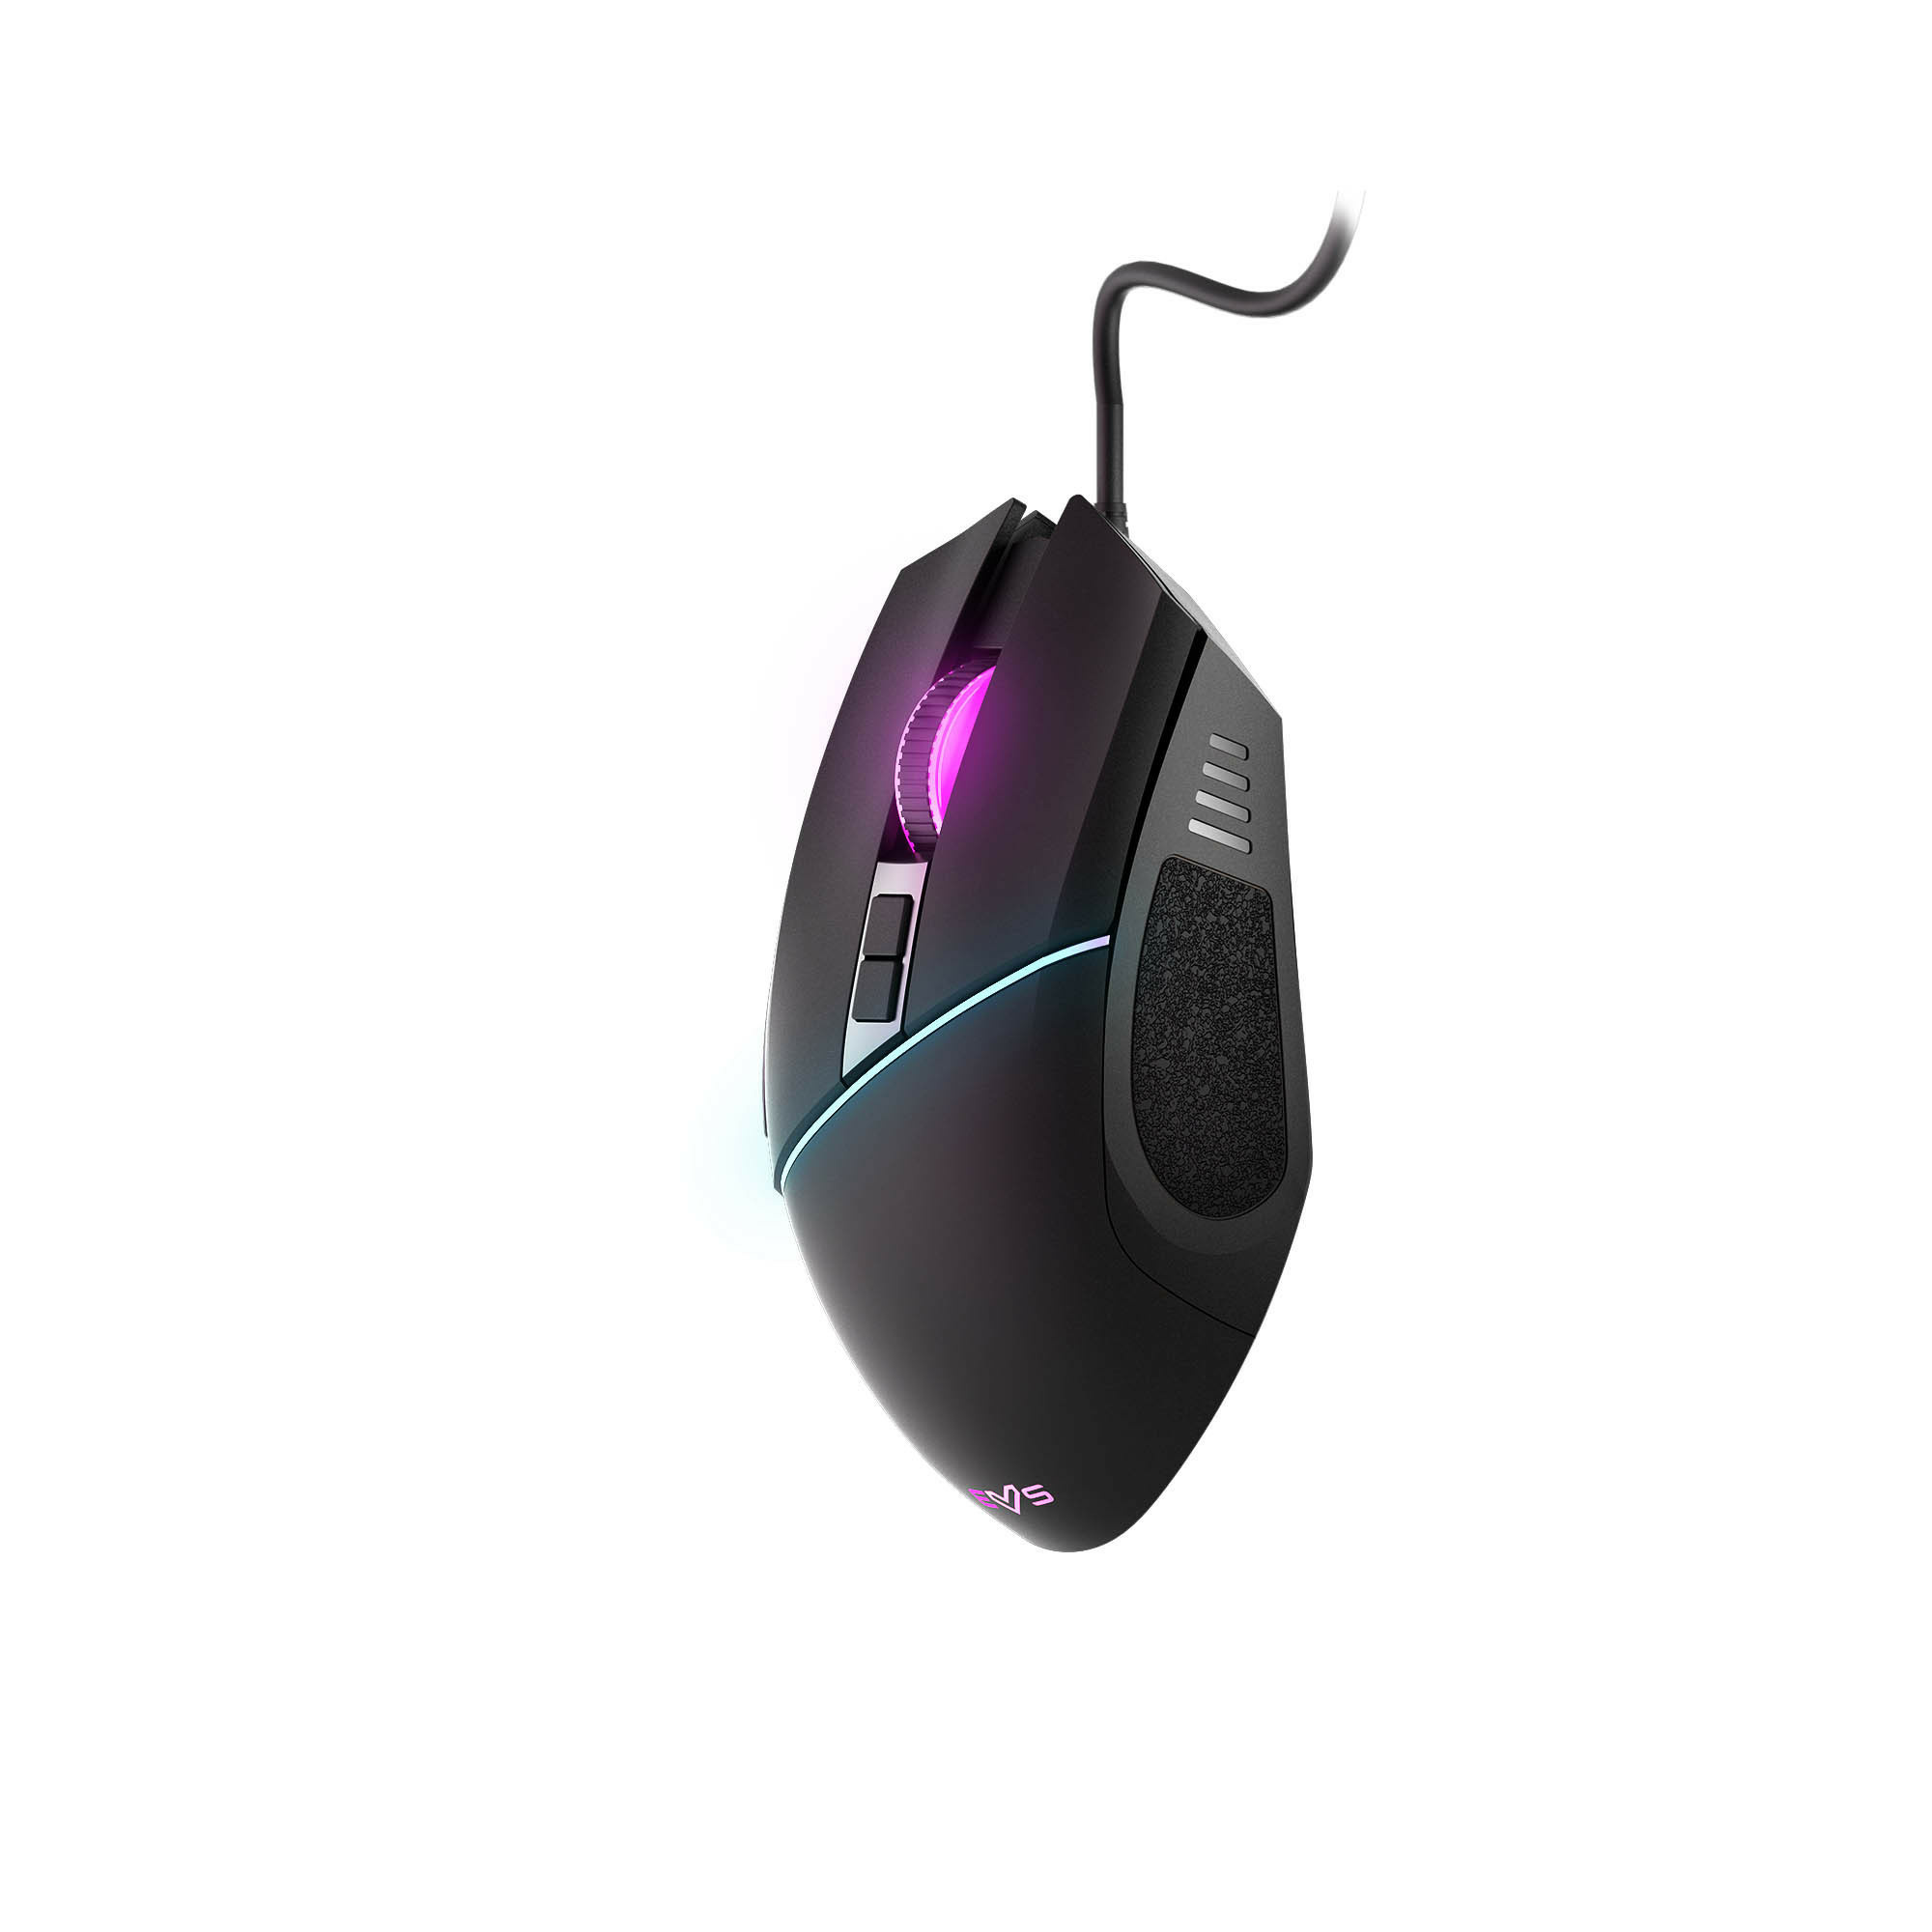 Gaming mouse with buttons which can be programmed via software